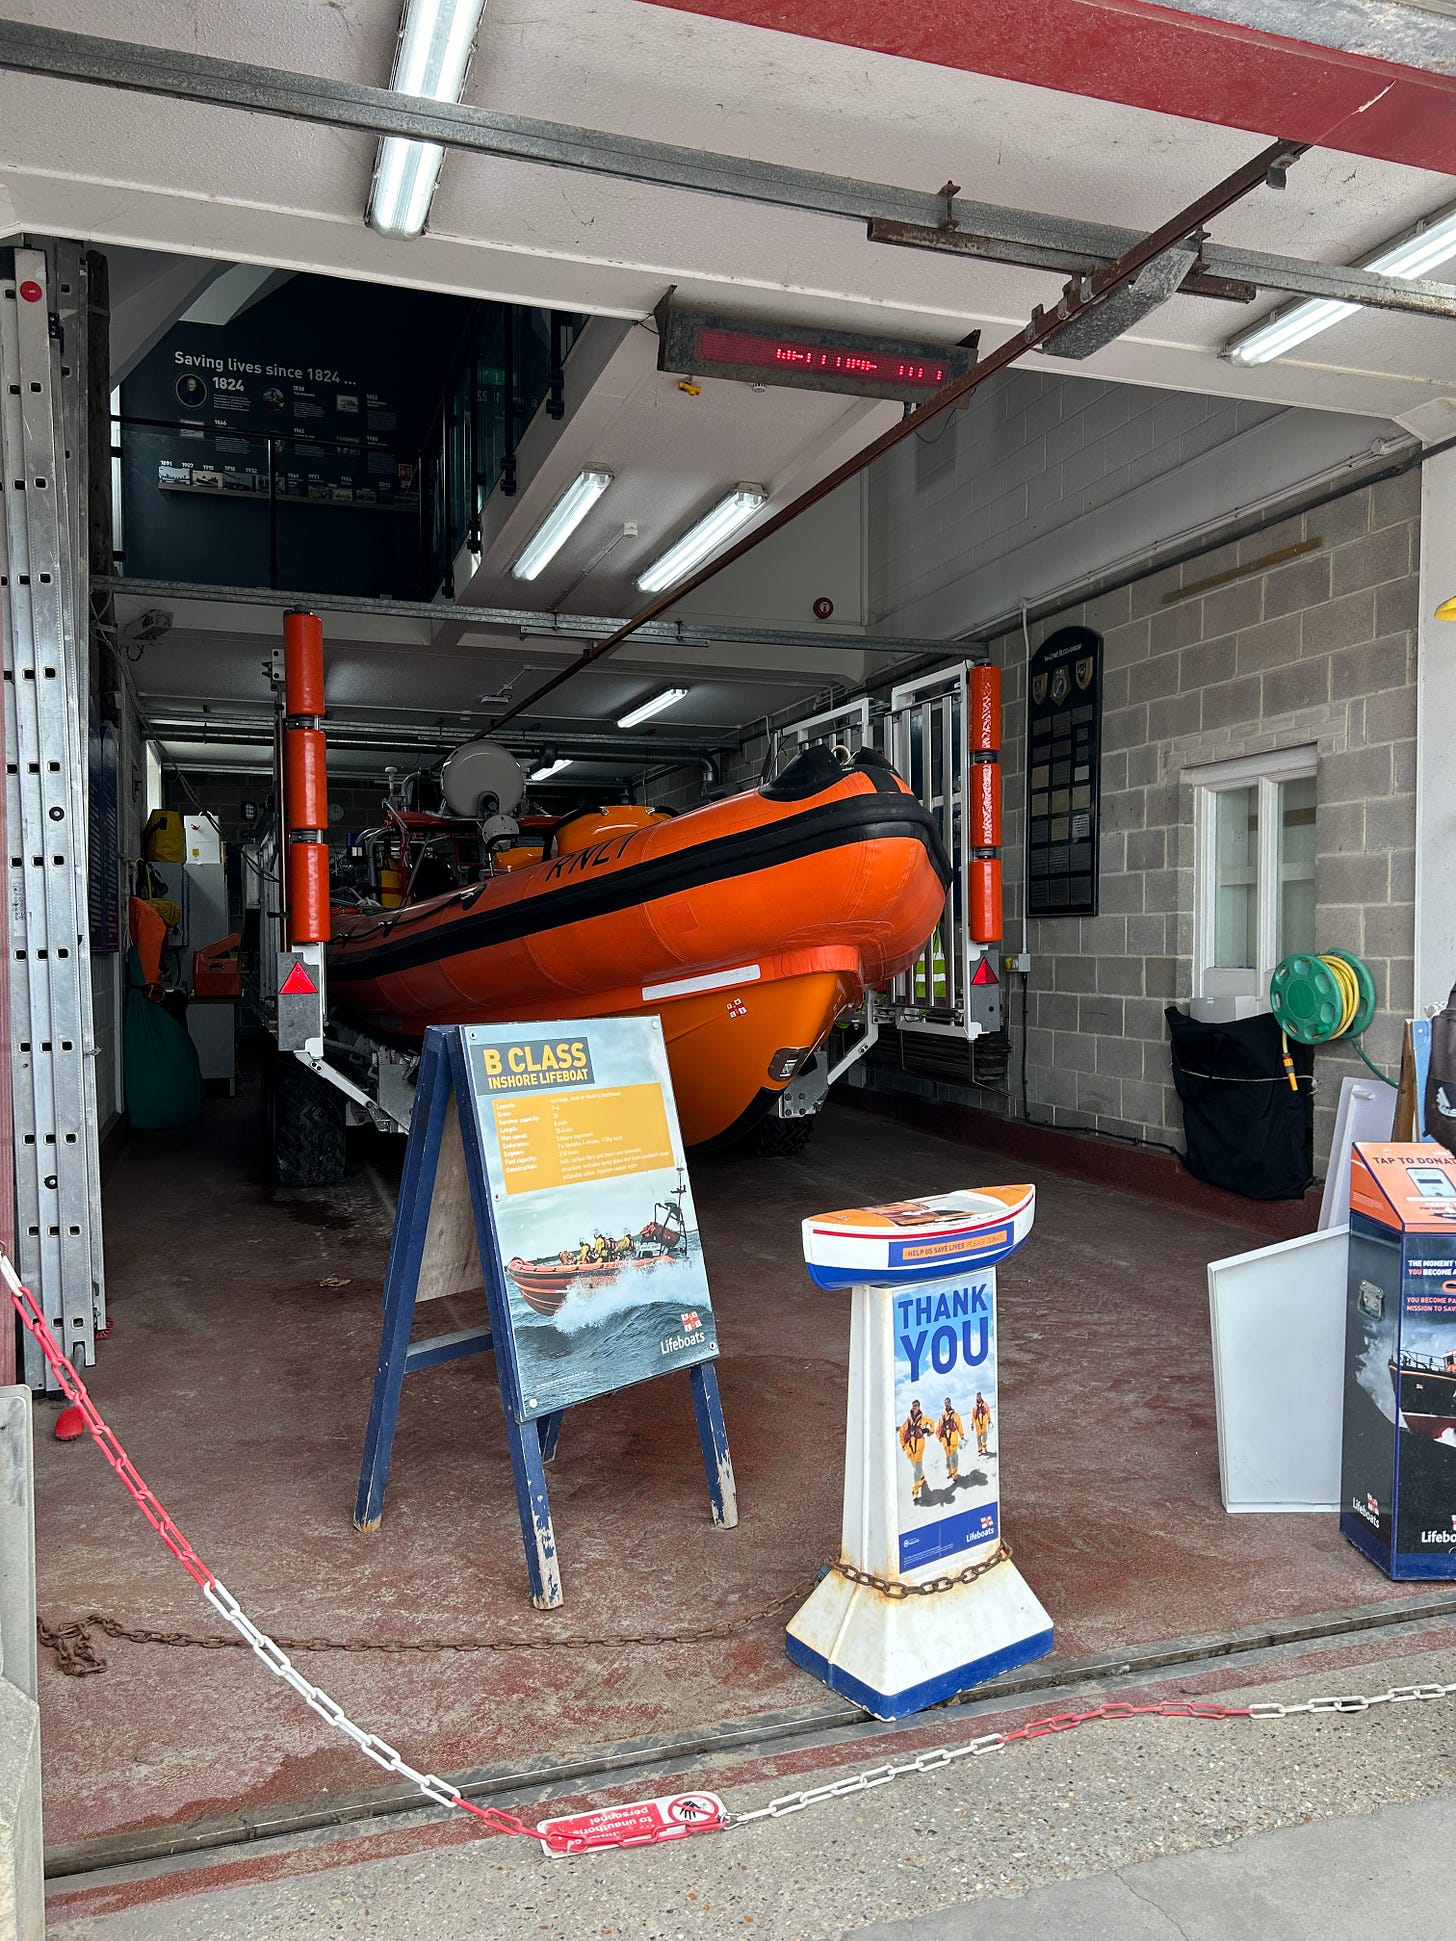 The Lyme Regis Lifeboat in its unit. Image: Roland's Travels